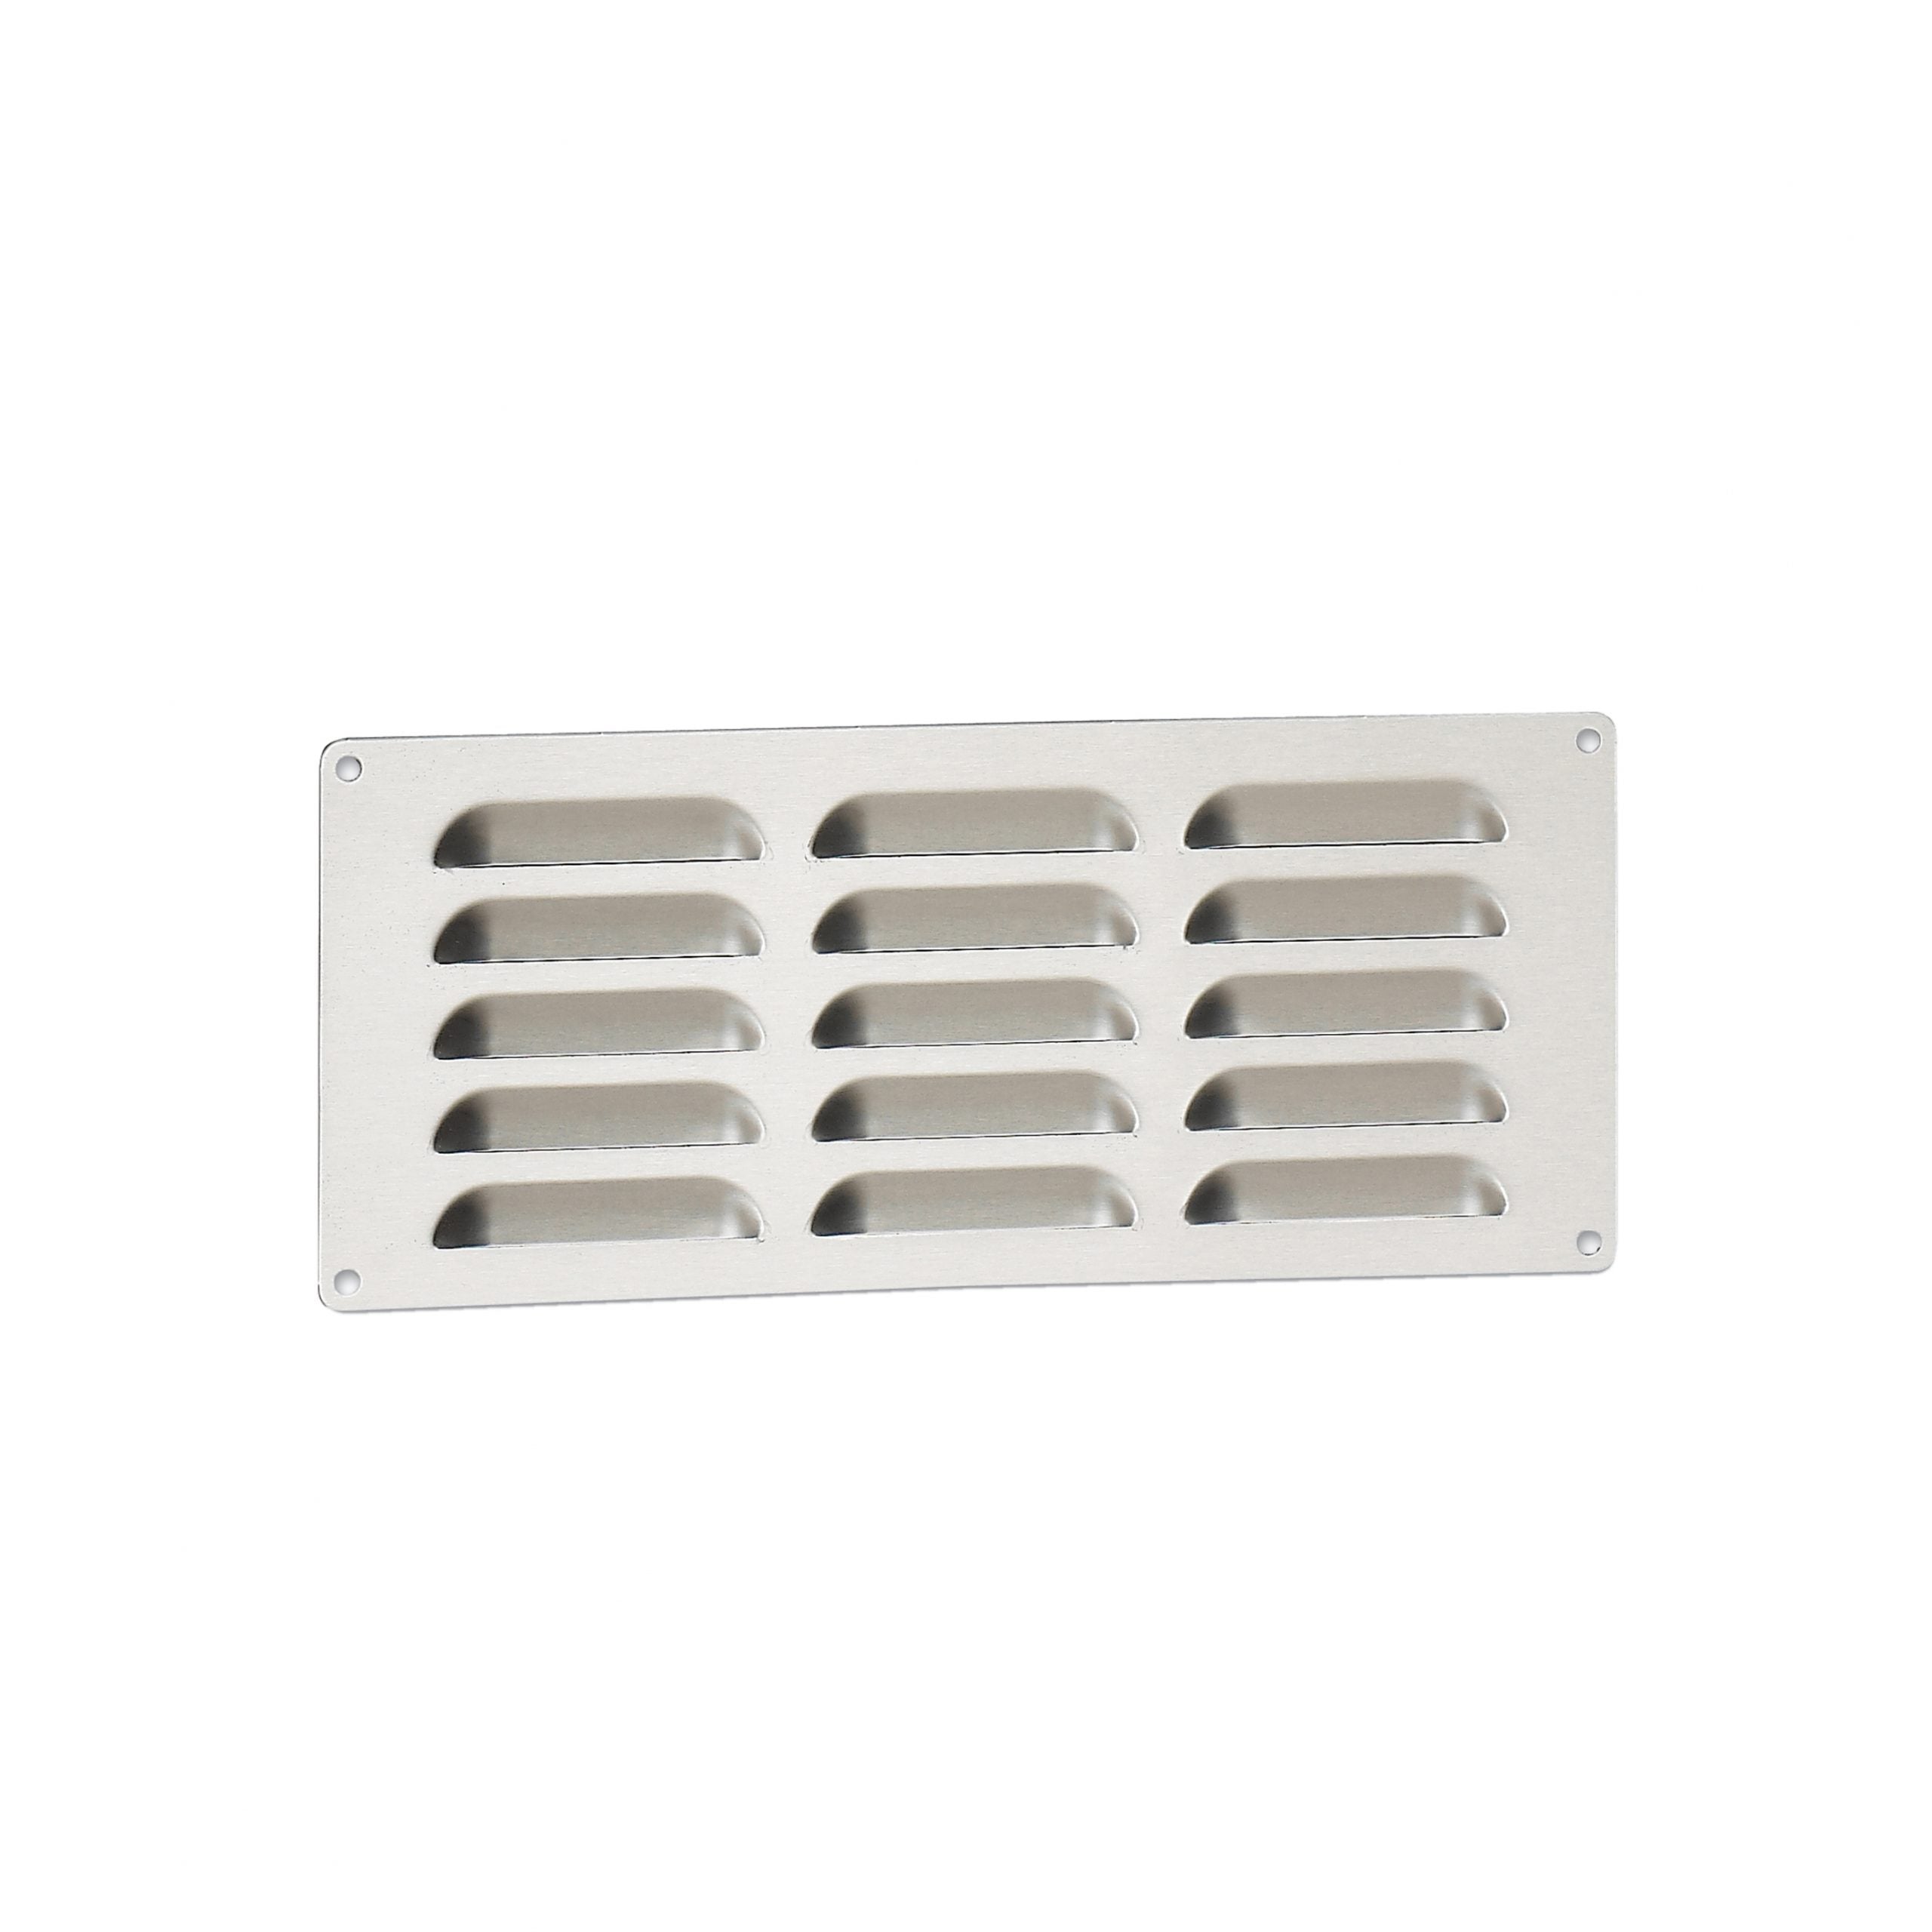 Louvered Stainless Steel Venting Panel